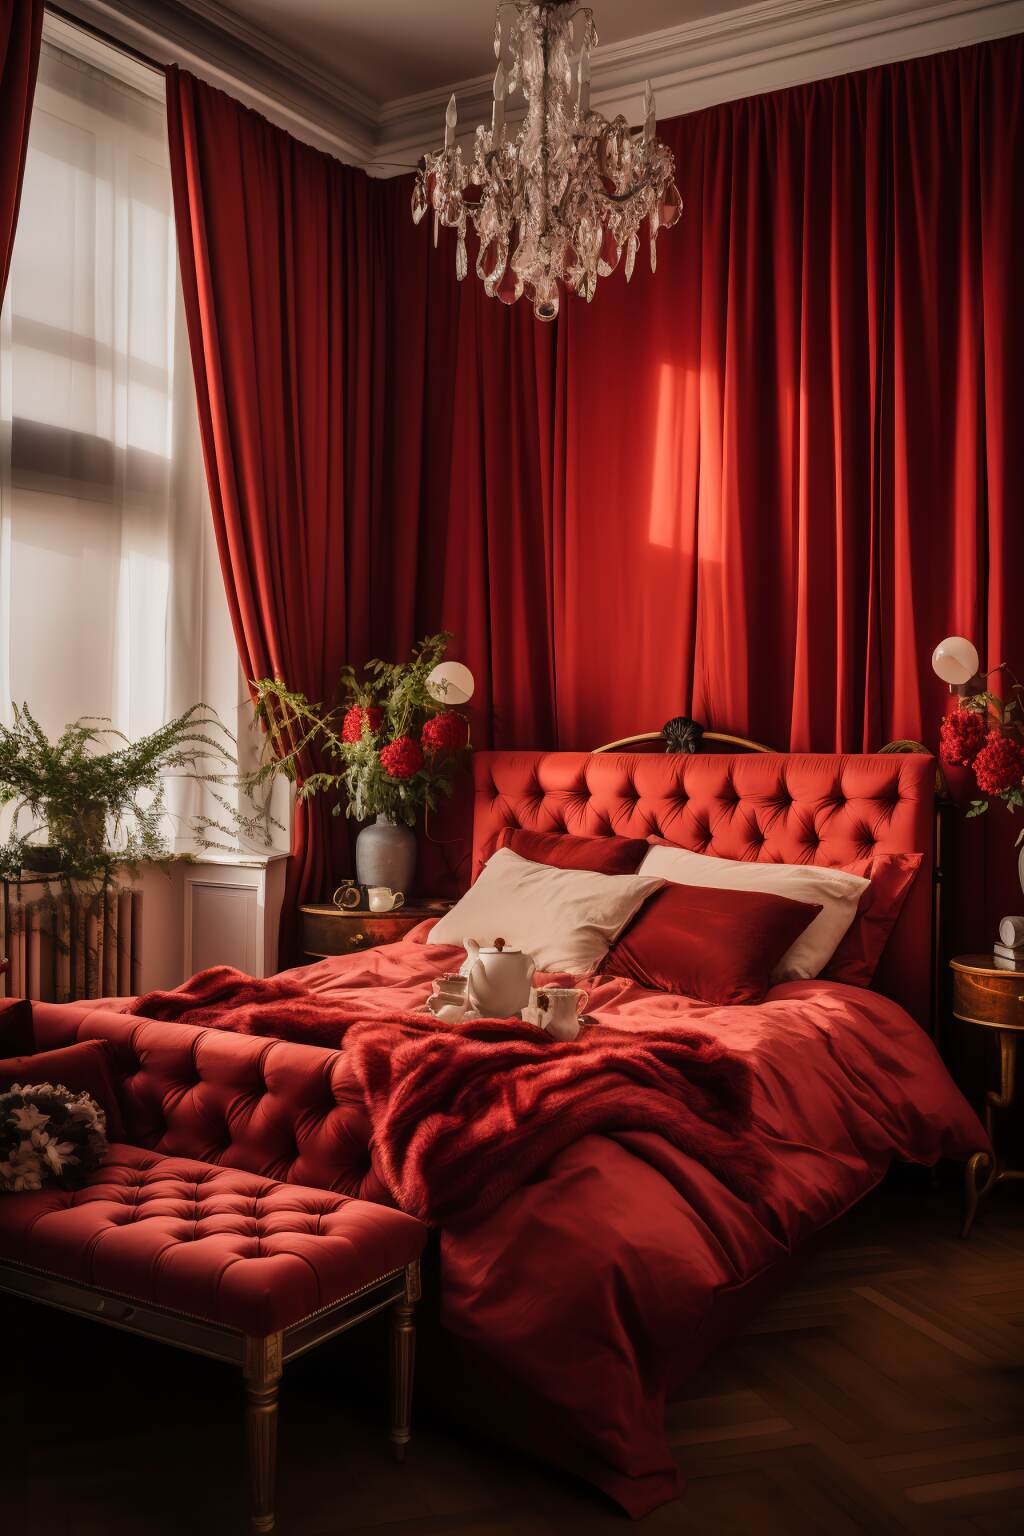 Bedroom Designed With A Rosy Red Theme